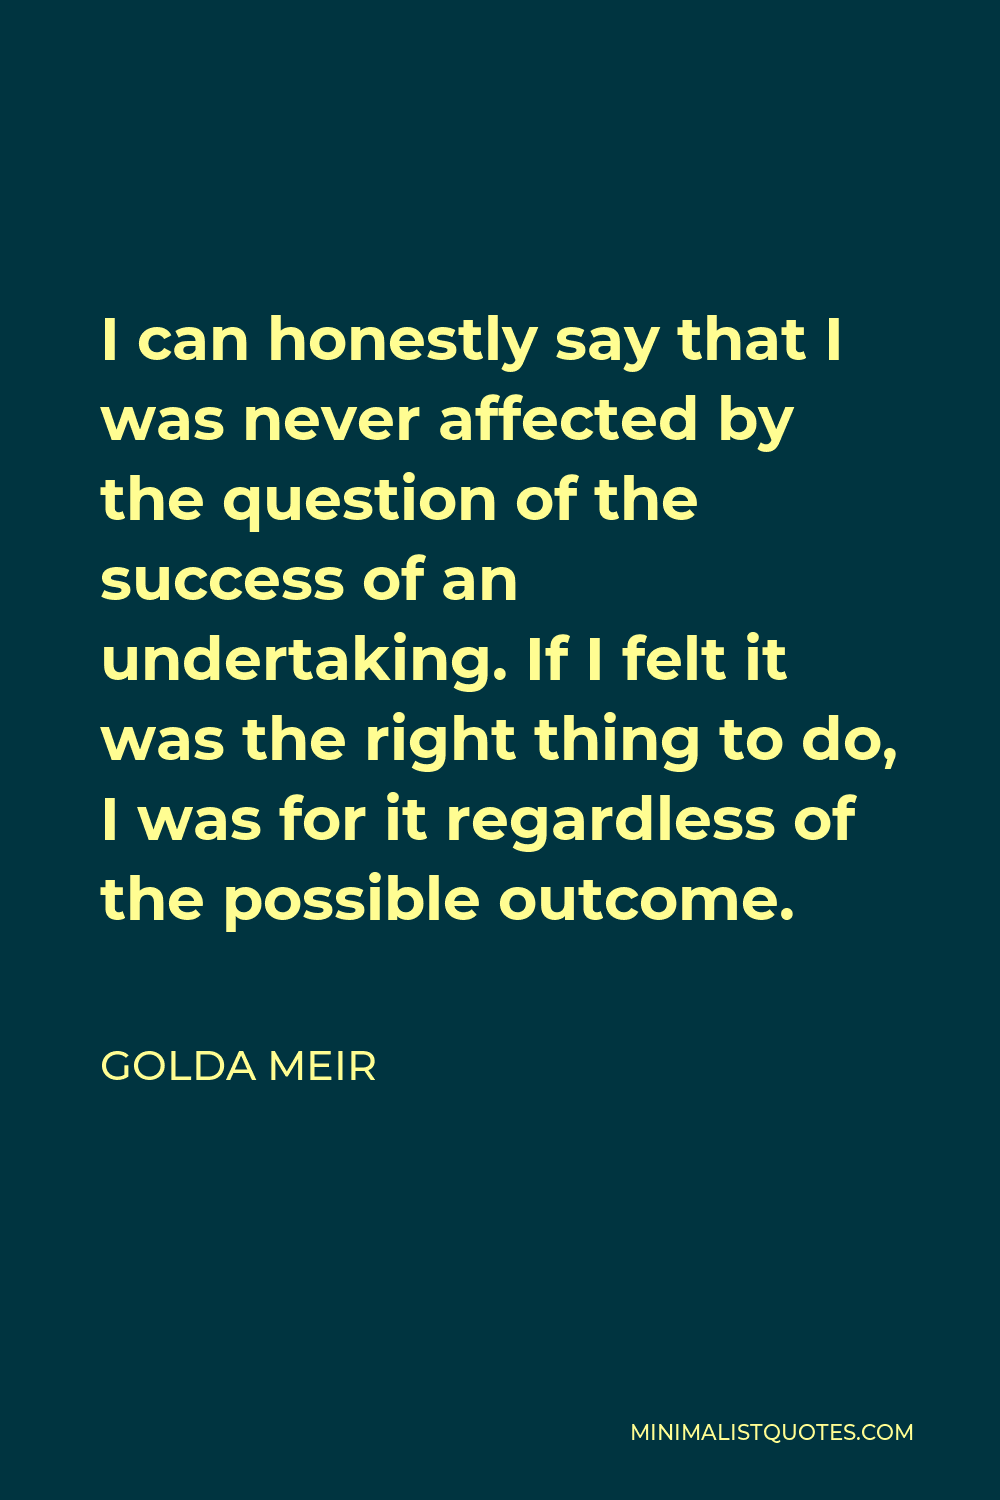 Golda Meir Quote - I can honestly say that I was never affected by the question of the success of an undertaking. If I felt it was the right thing to do, I was for it regardless of the possible outcome.